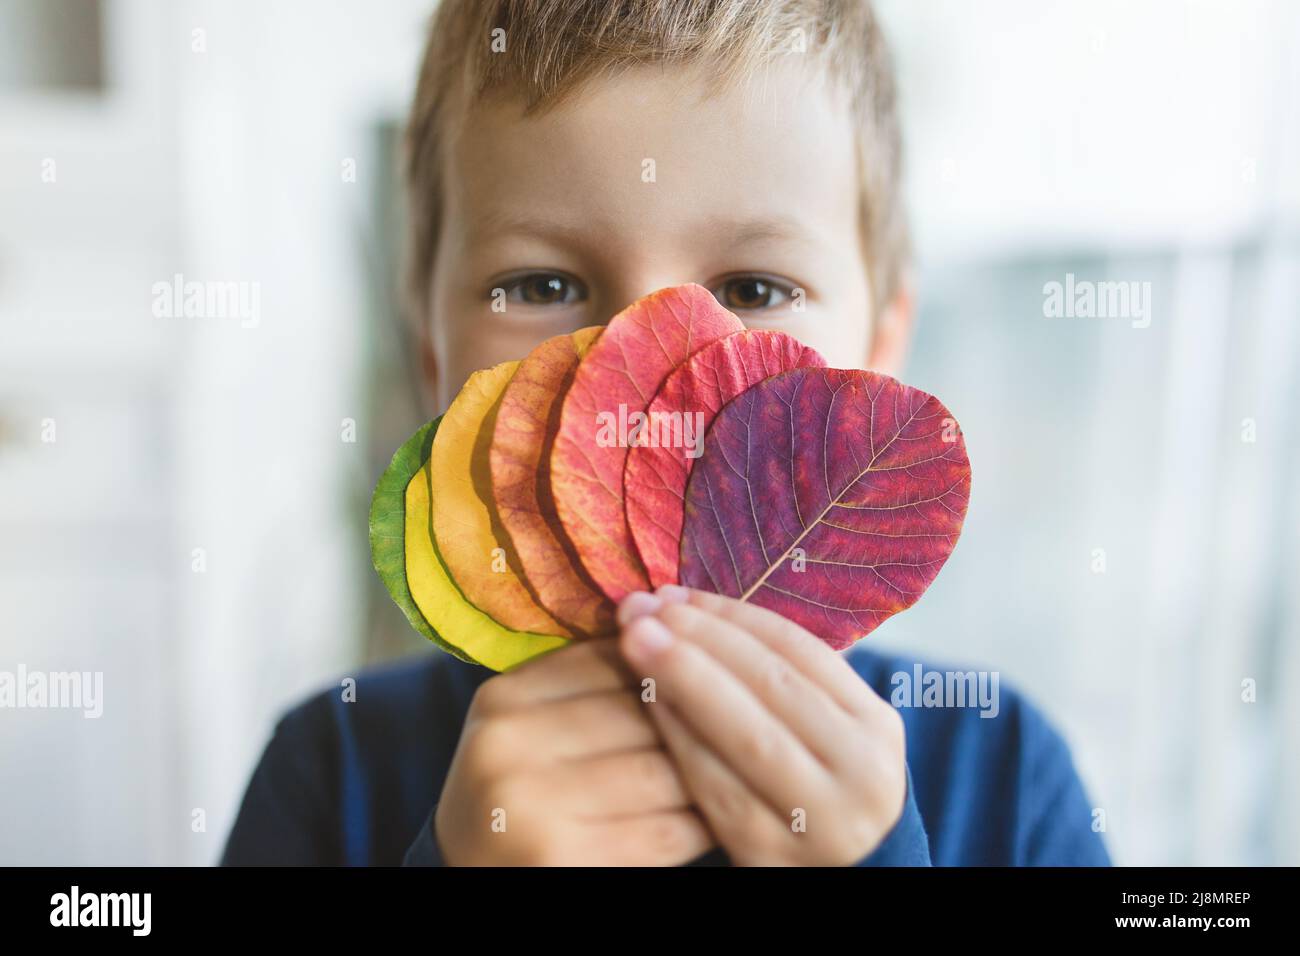 Young child holding a selection of colorful leaves Stock Photo